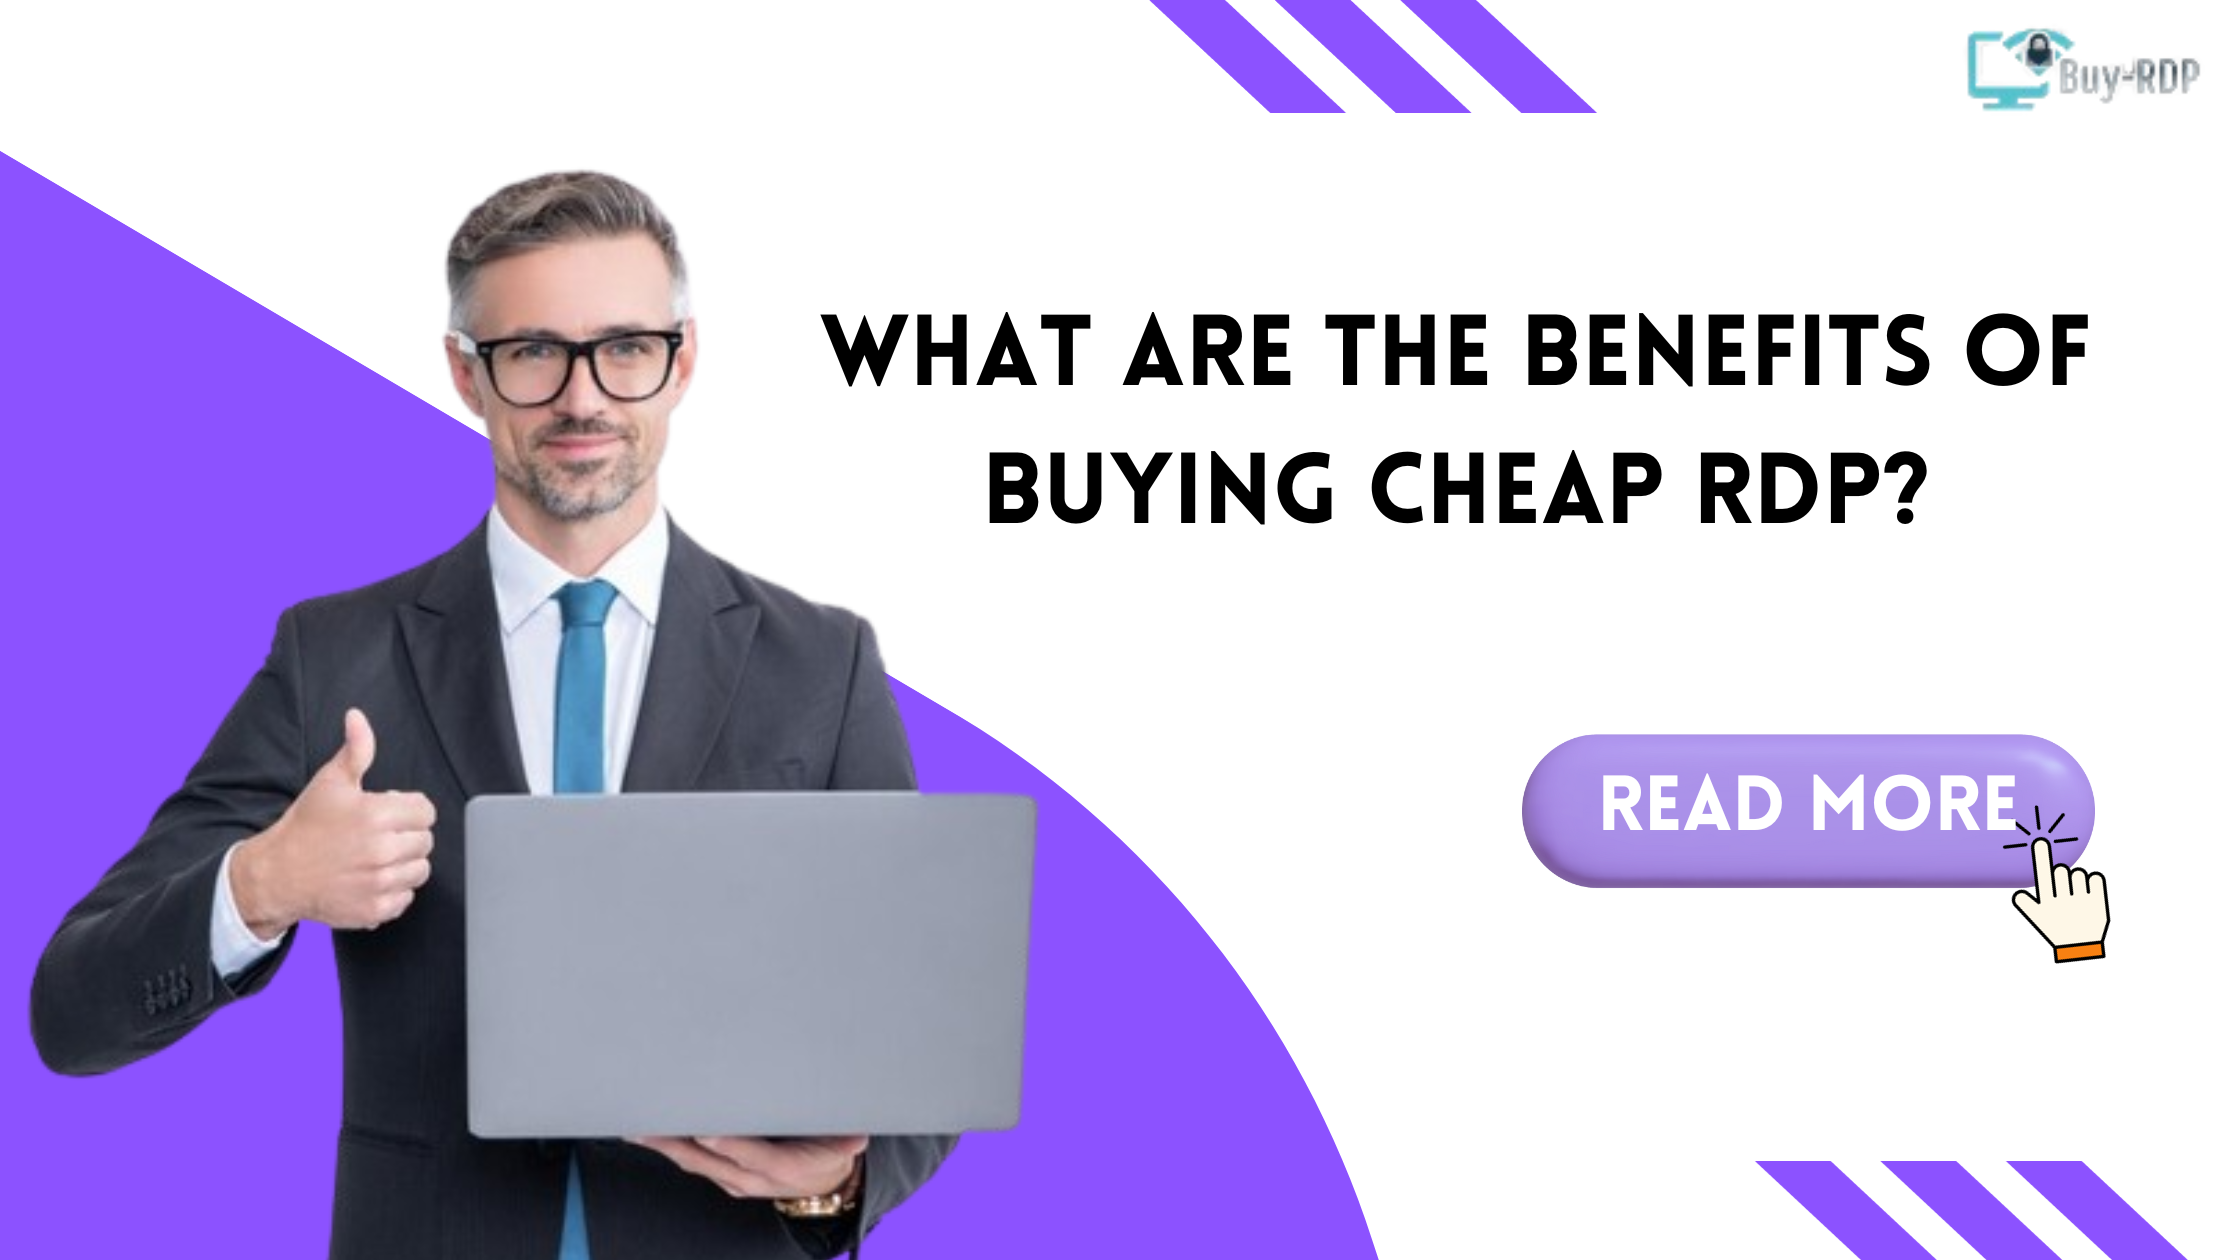 What Are the Benefits of Buying Cheap RDP?